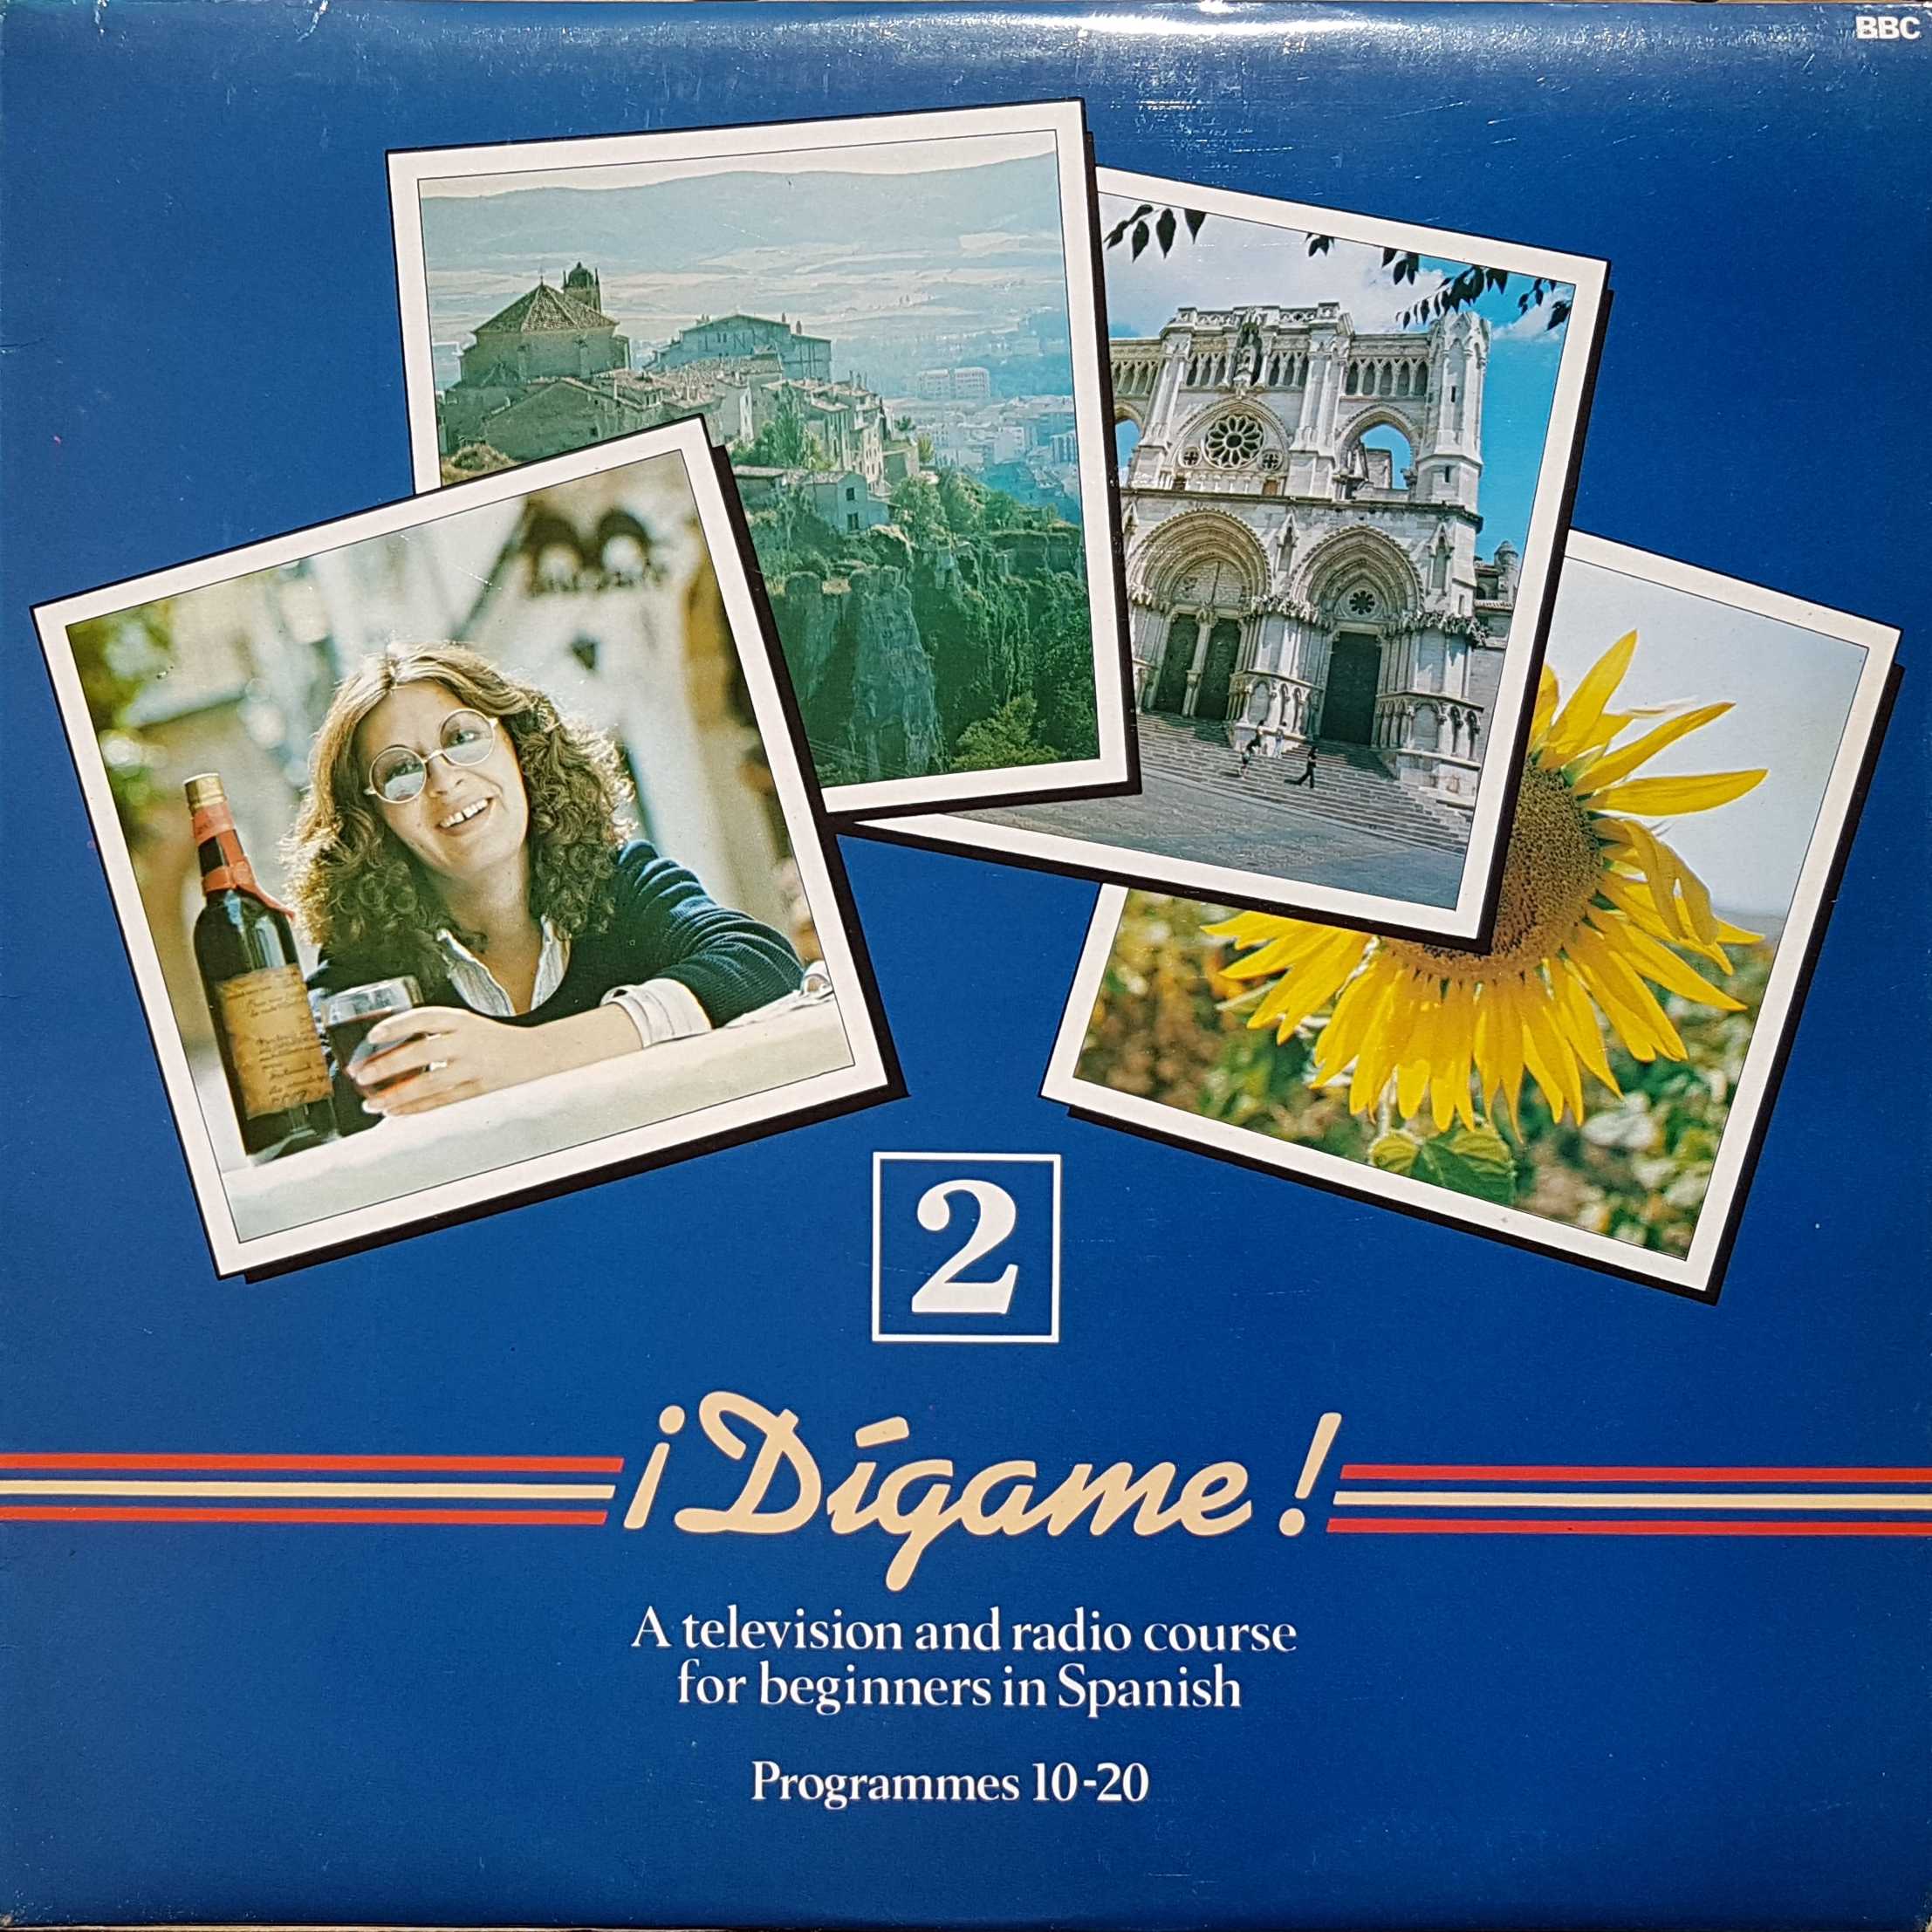 Picture of OP 231 Digame ! 2 - A television and radio course for beginners in Spanish - Programmes 10 - 20 by artist Various from the BBC albums - Records and Tapes library